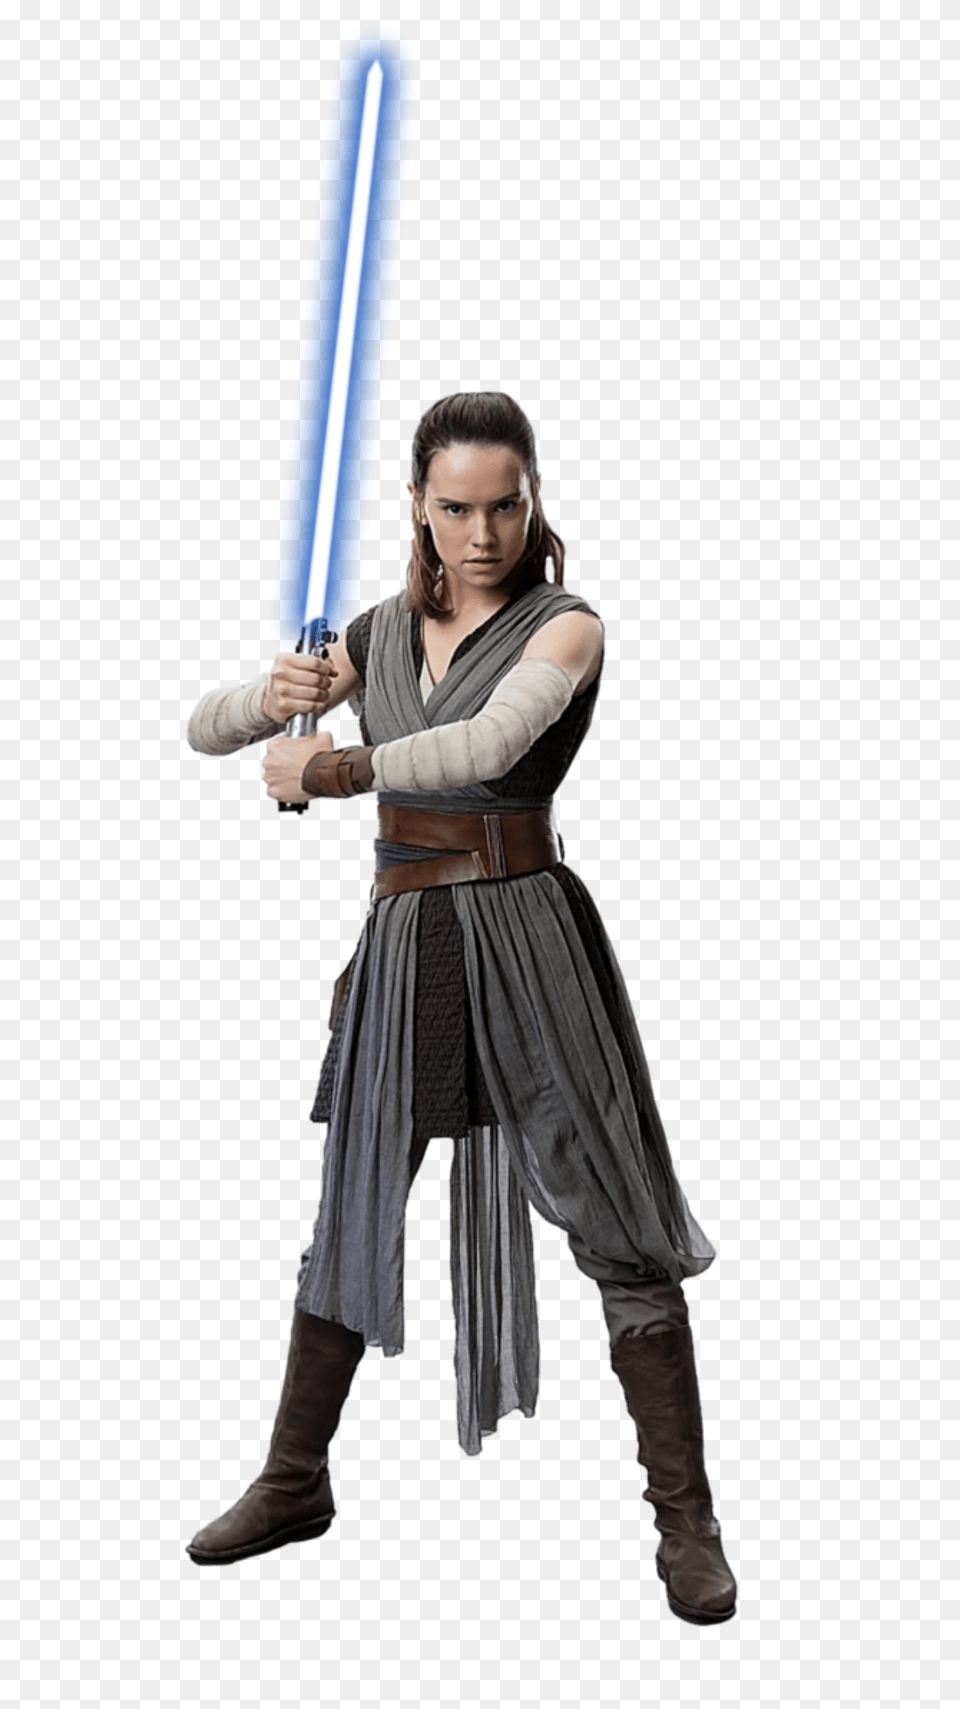 Star Wars Images Rey The Last Jedi Costume, Sword, Weapon, Adult, Female Free Transparent Png